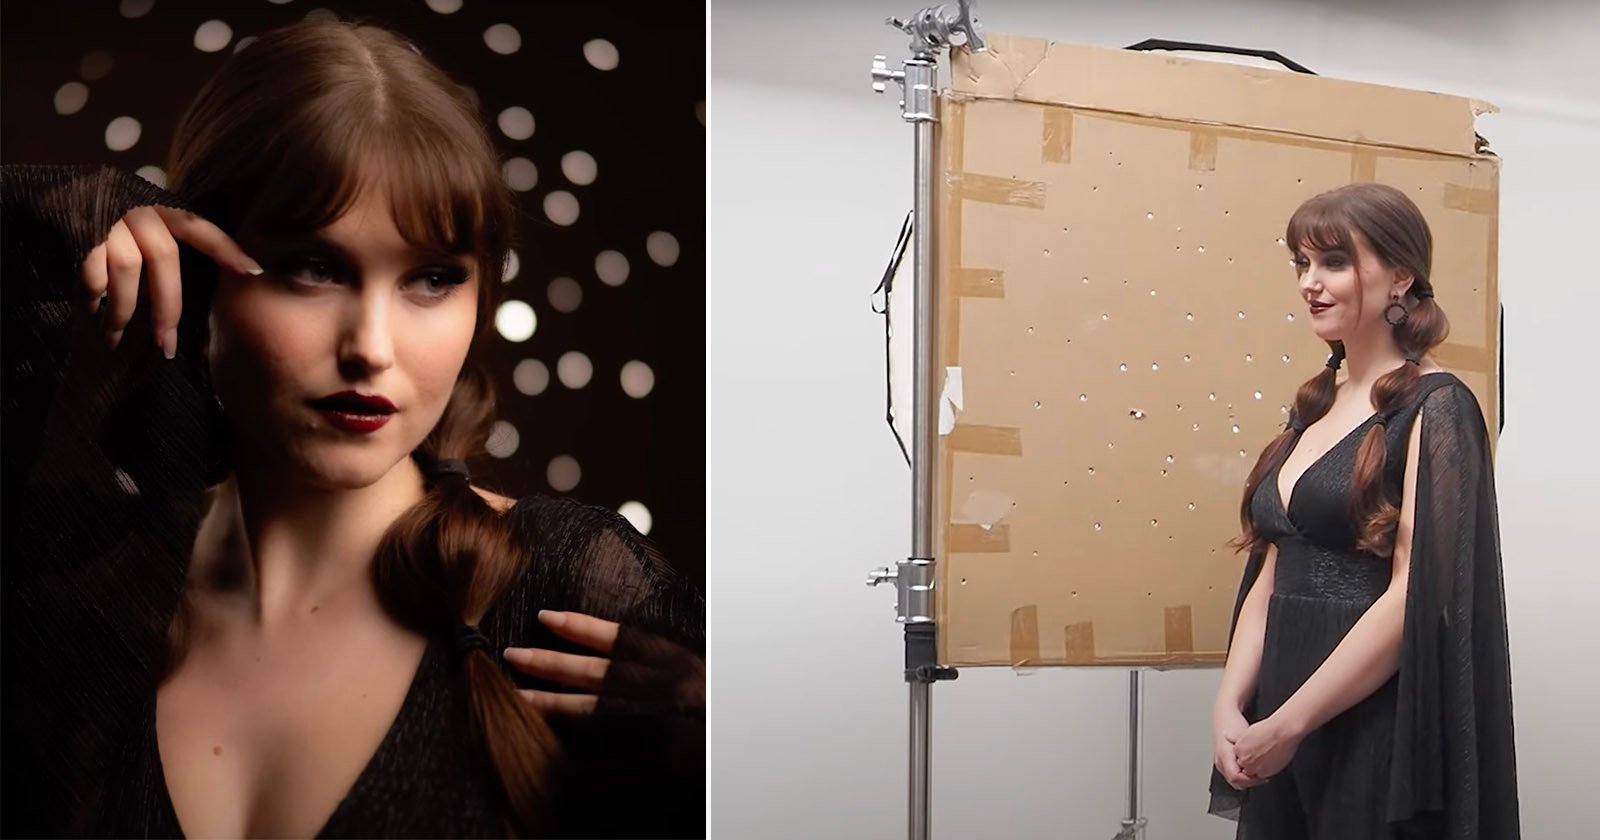 How to Recycle Cardboard Into a Creative Photography Backdrop